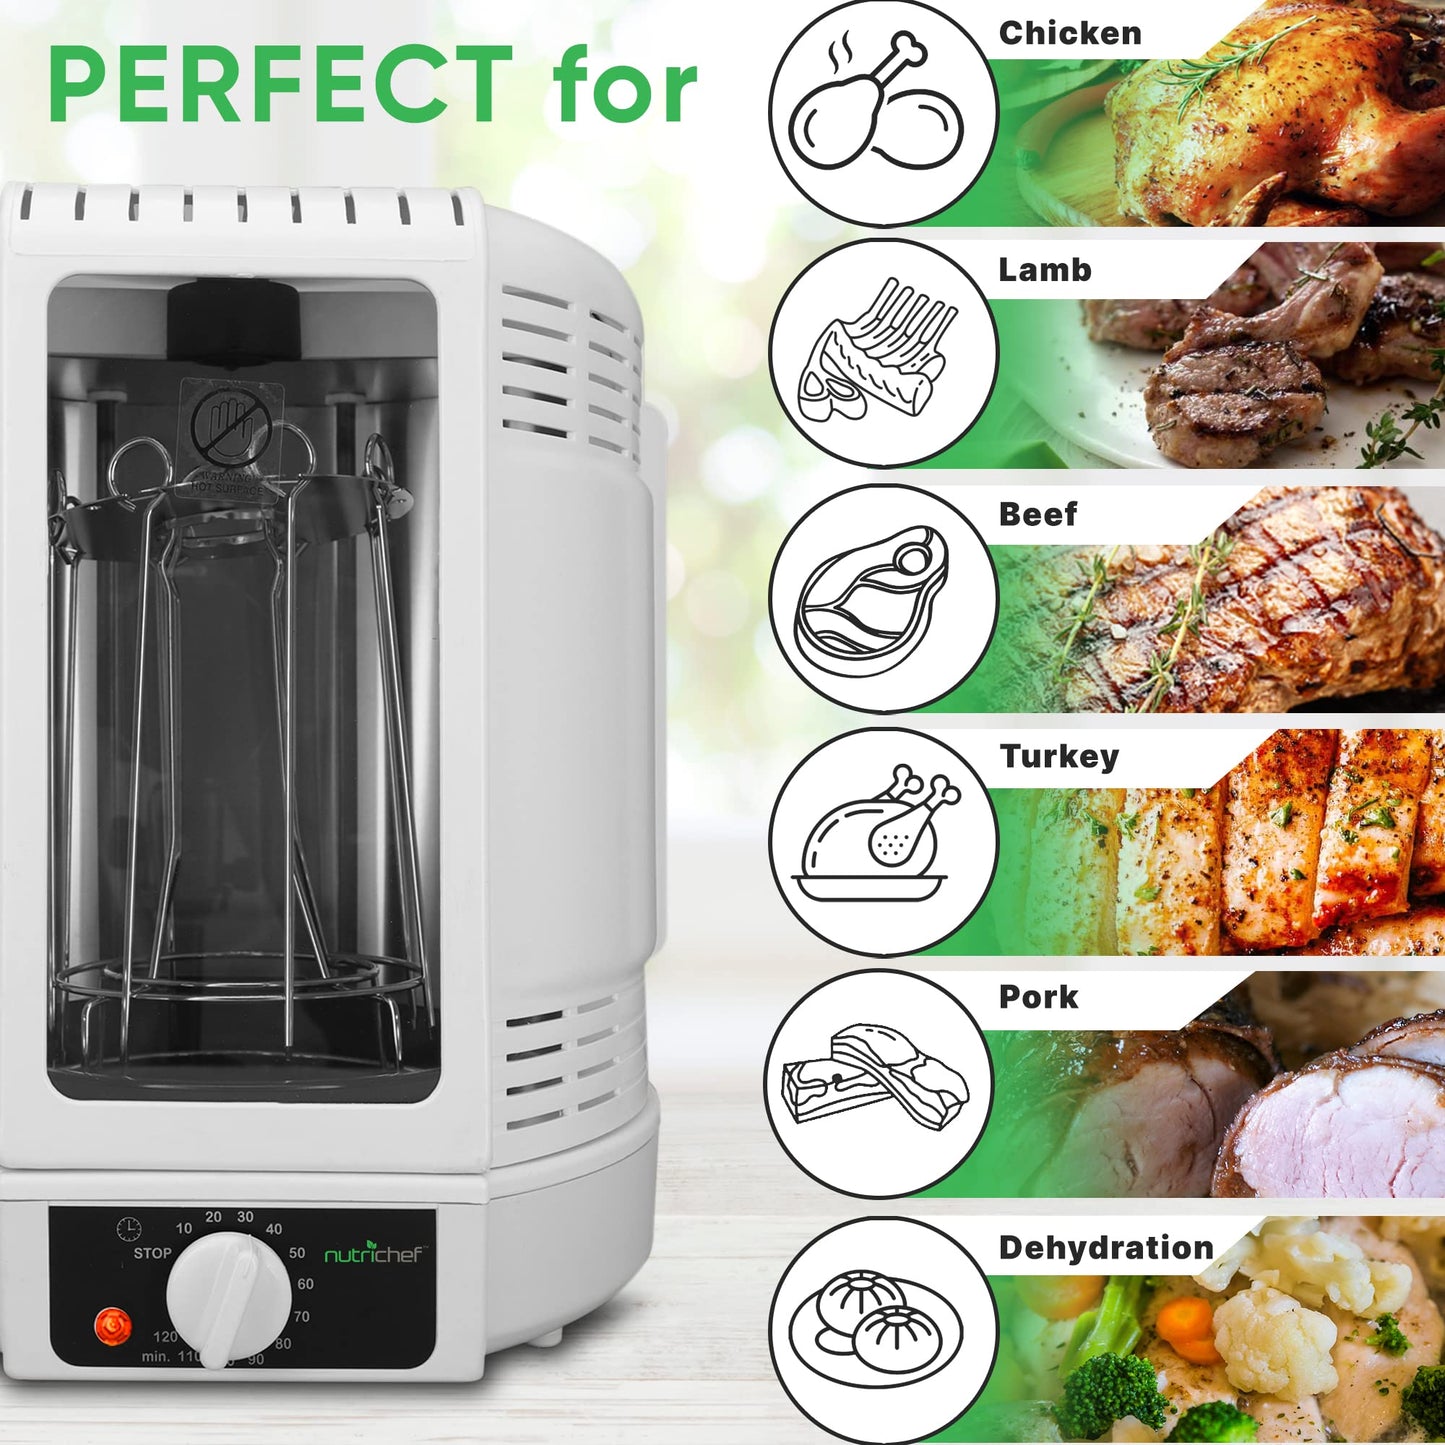 NutriChef Vertical Rotisserie Oven Roaster - Rotating Shawarma/Kebab Machine with Skewer and Rack, Basket Tower, Roasting Rack, Poultry Tower, Drip Tray - For Meat Chicken Turkey Lamb - PKRT15 White